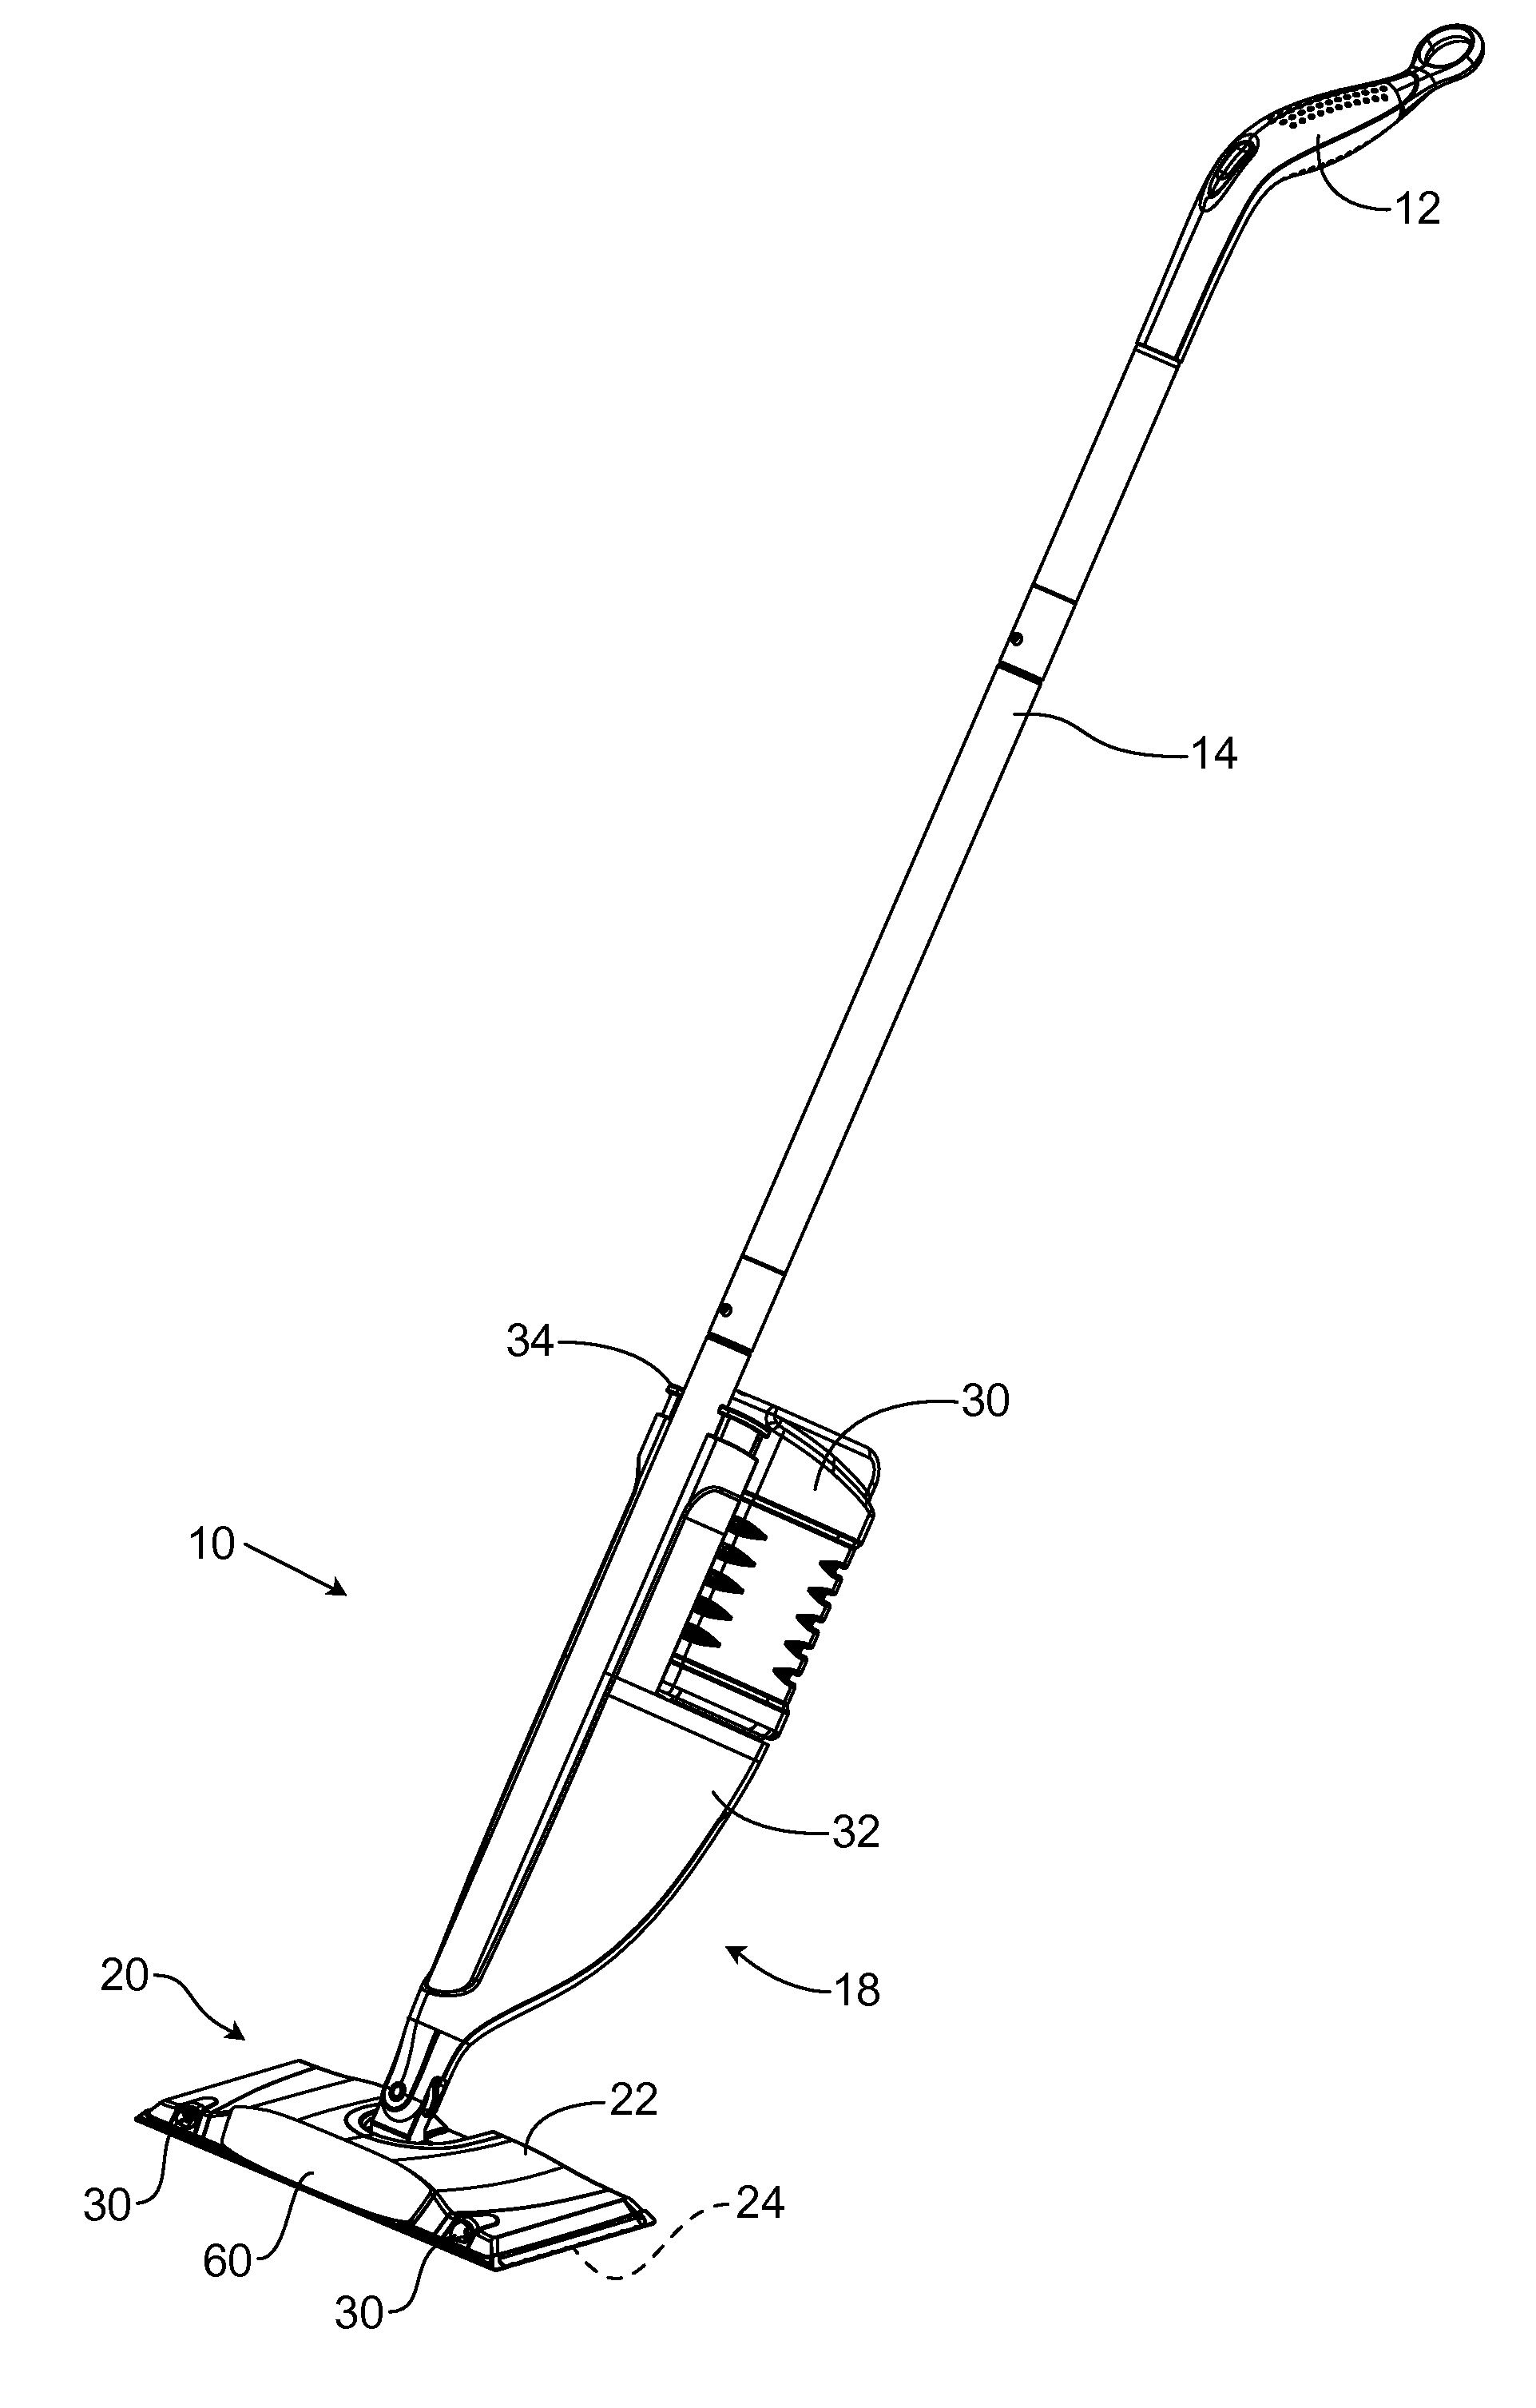 Plural nozzle cleaning implement